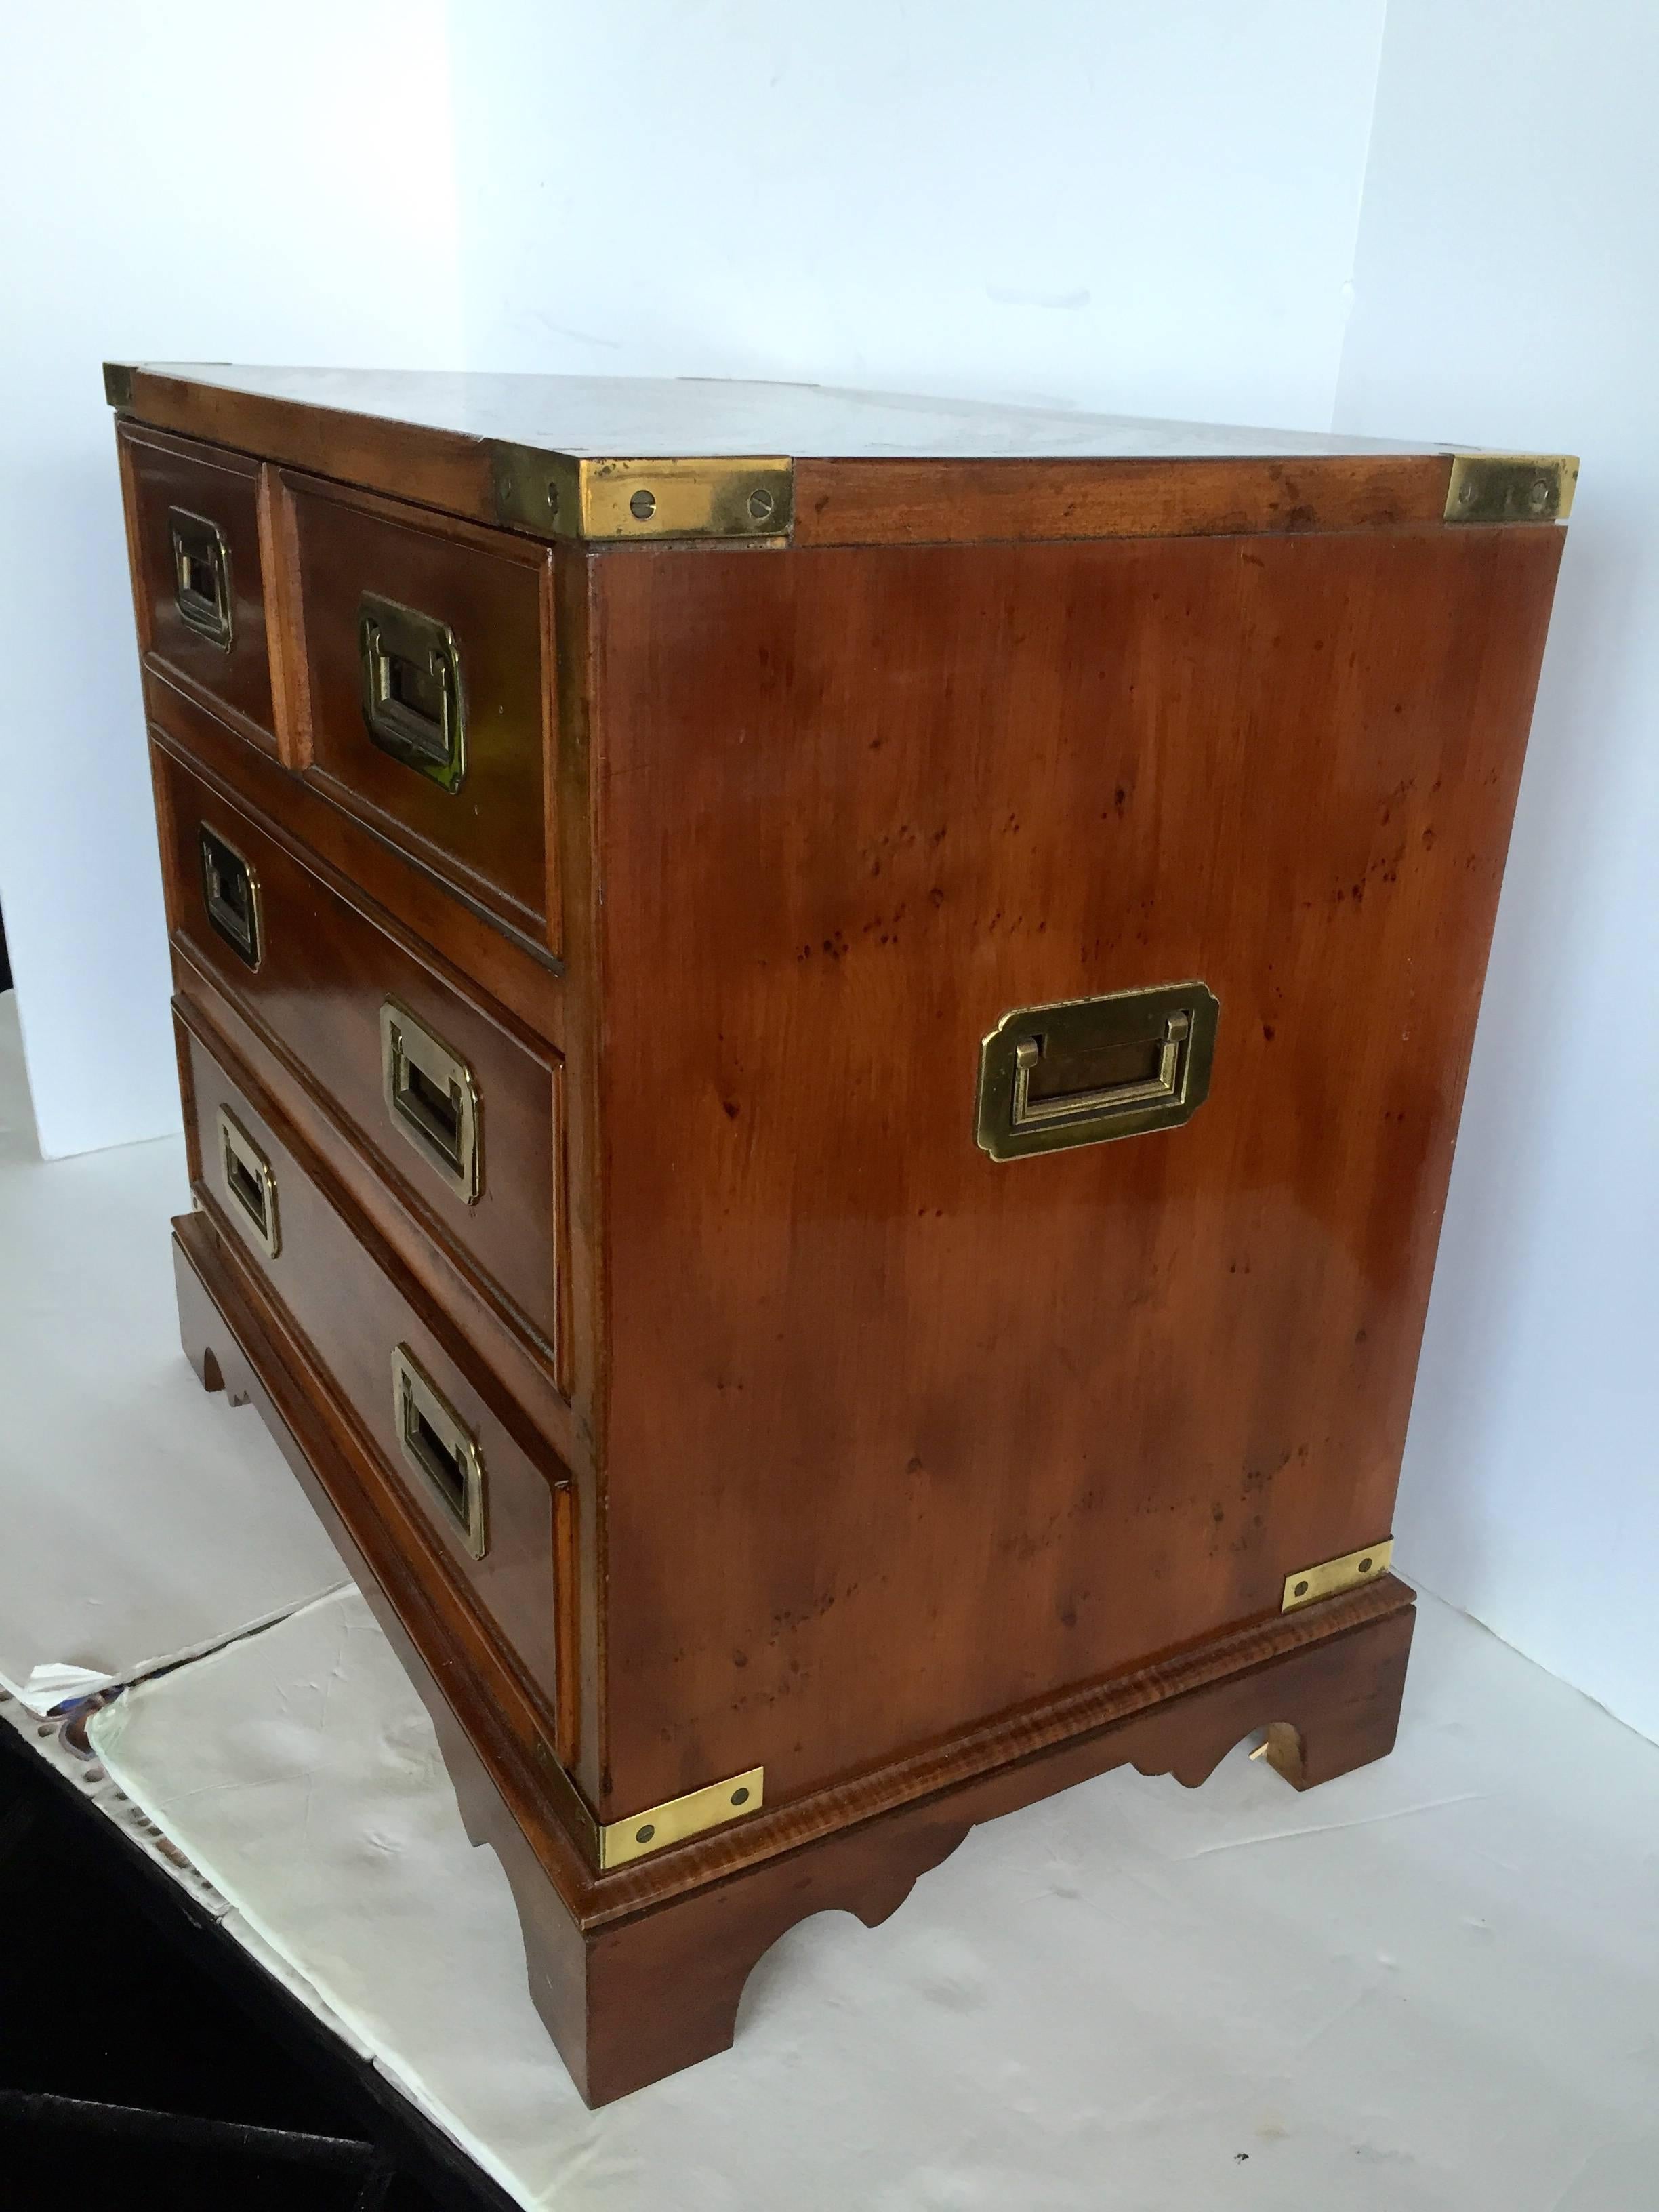 Charming 4 drawer chest by Drexel in miniature form,  With brass hardware this ;is salesmans sample would make a great jewelry chest.